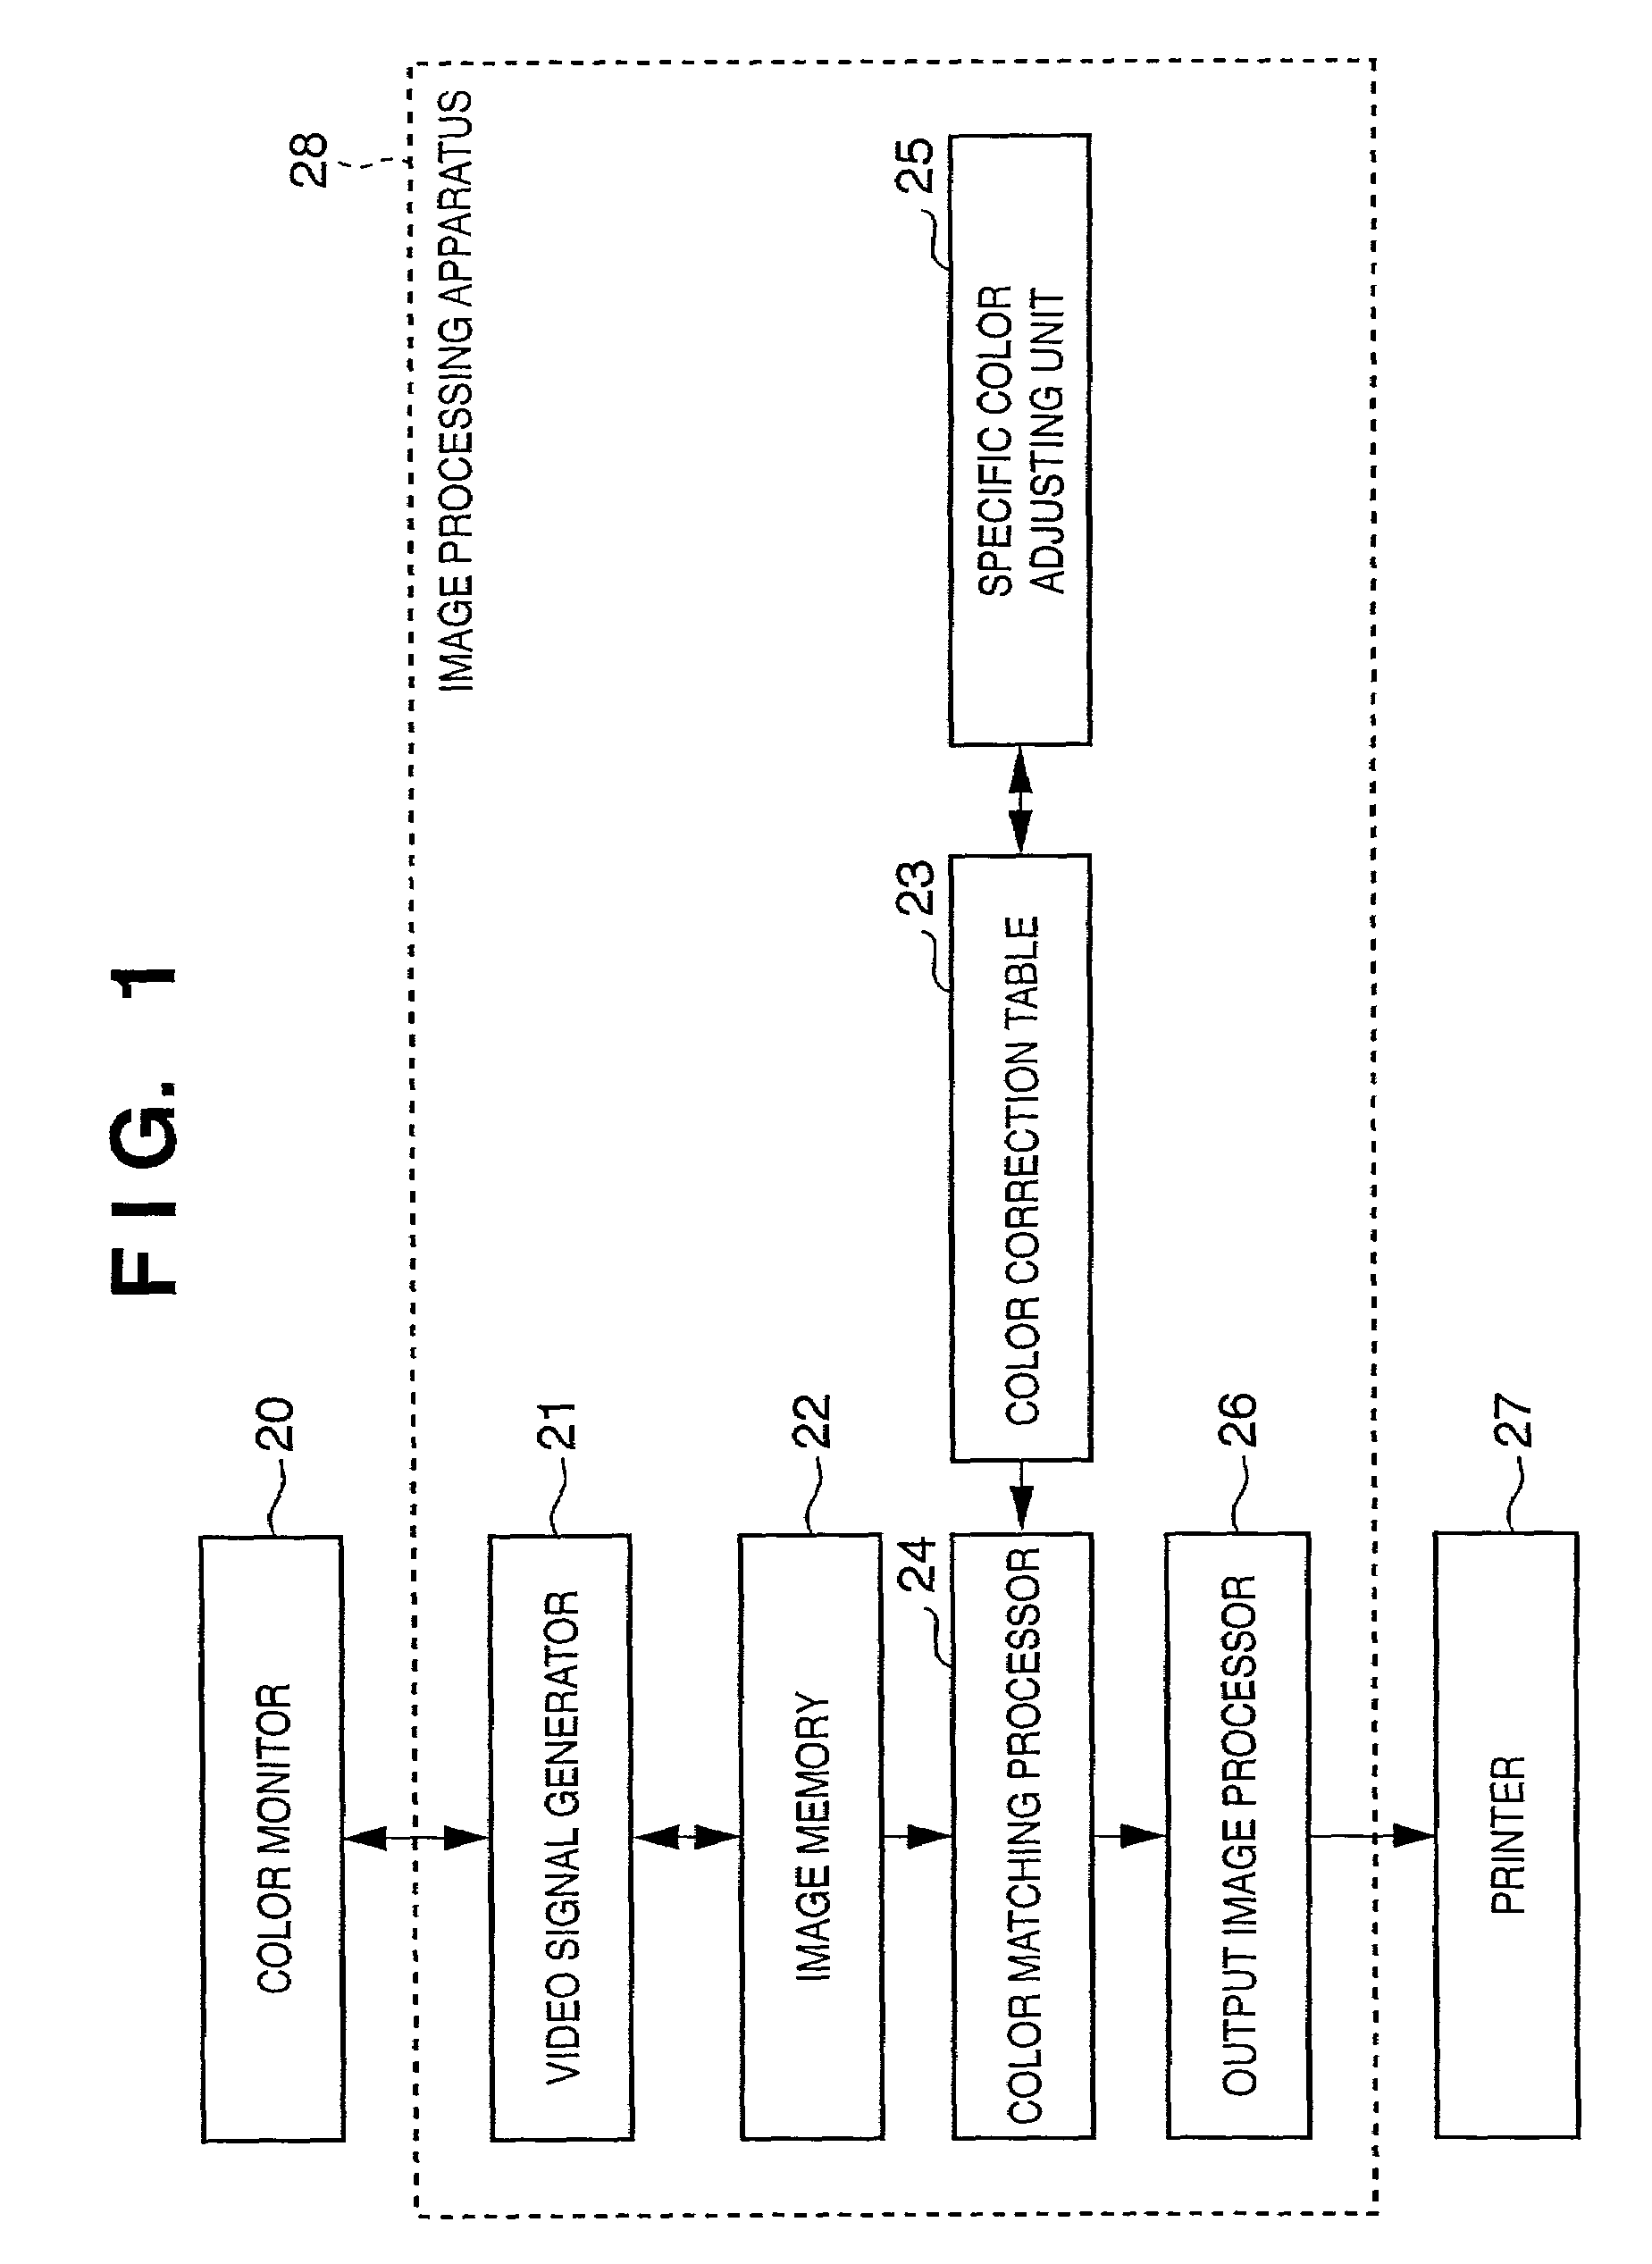 Image processing apparatus and method, and image processing system